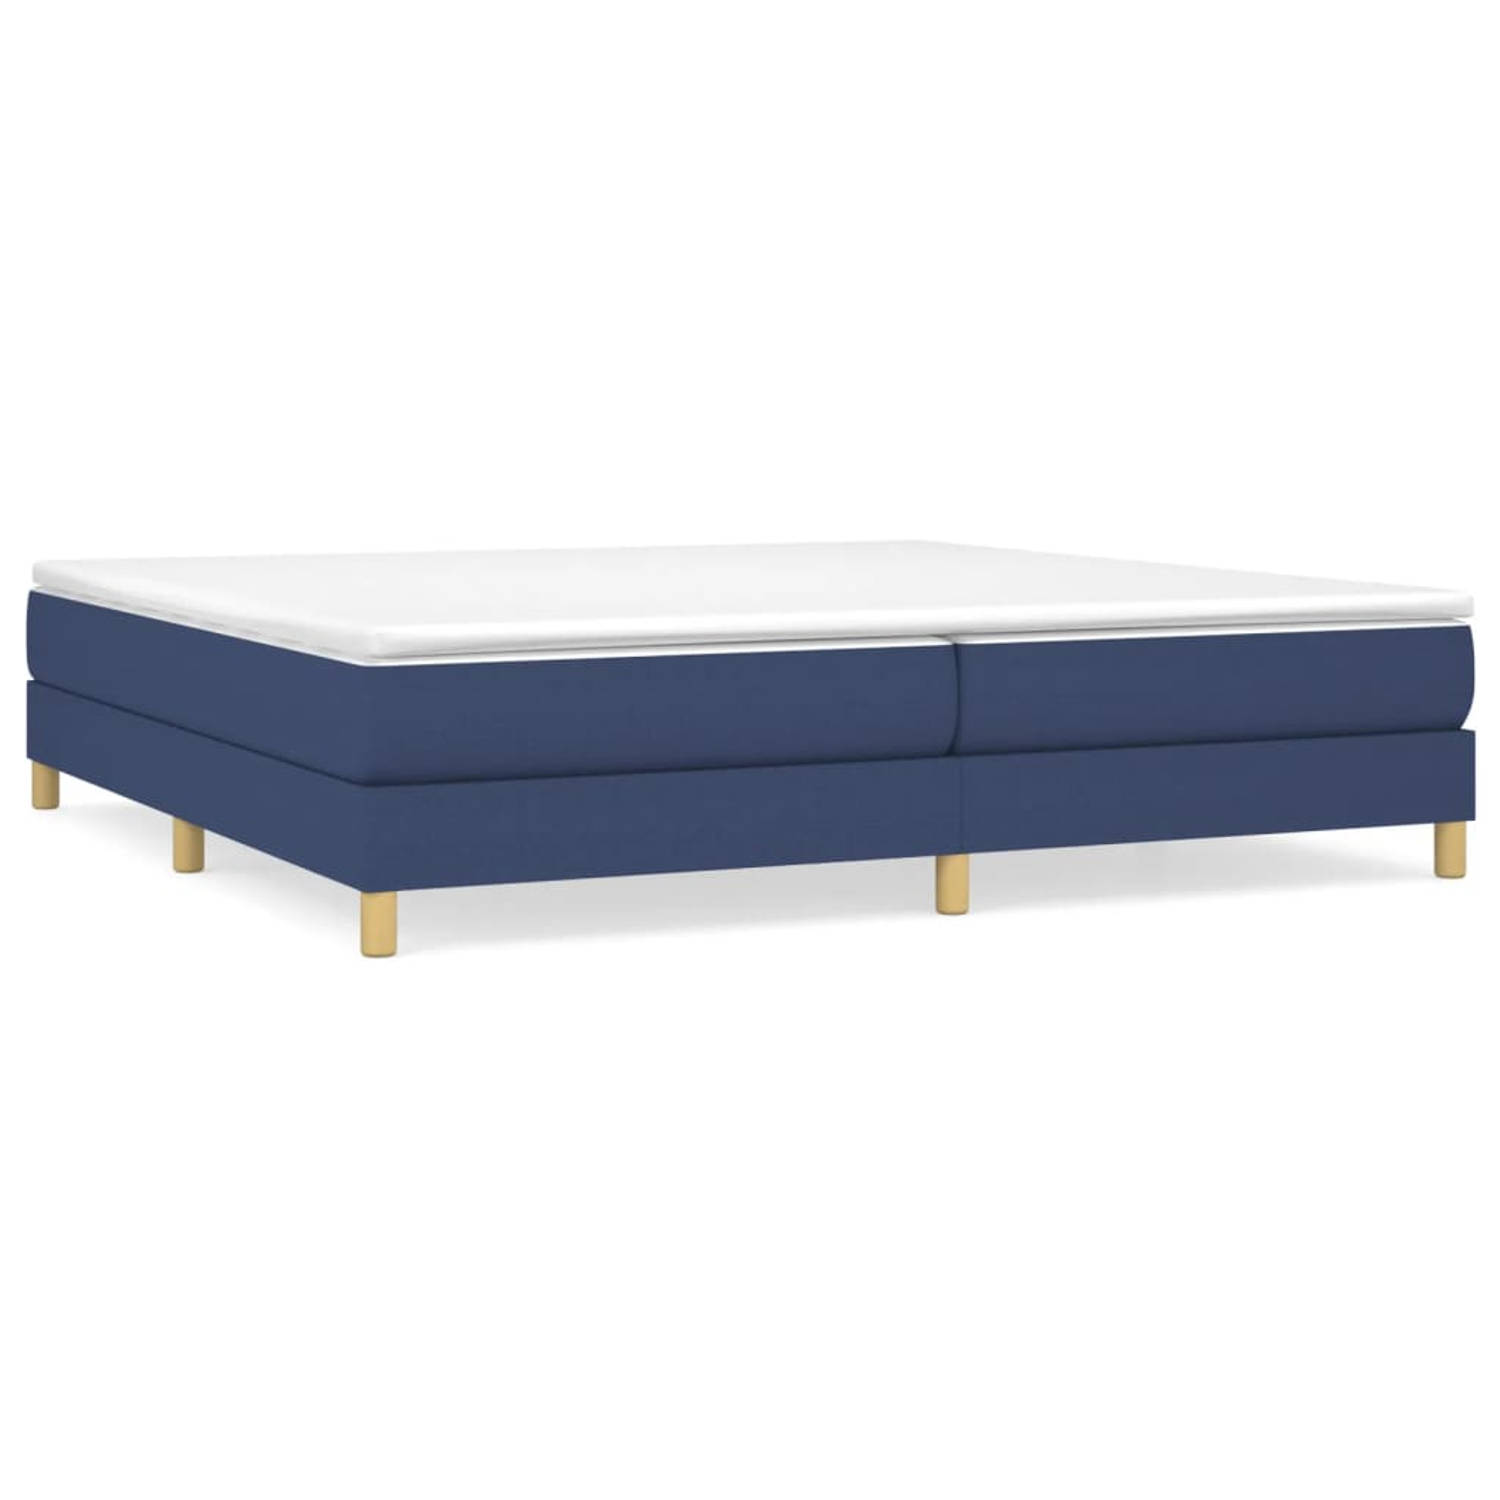 The Living Store Boxspringframe stof blauw 200x200 cm - Boxspringframe - Boxspringframes - Bed - Ledikant - Slaapmeubel - Bedframe - Bedbodem - Tweepersoonsbed - Boxspring - Bedden